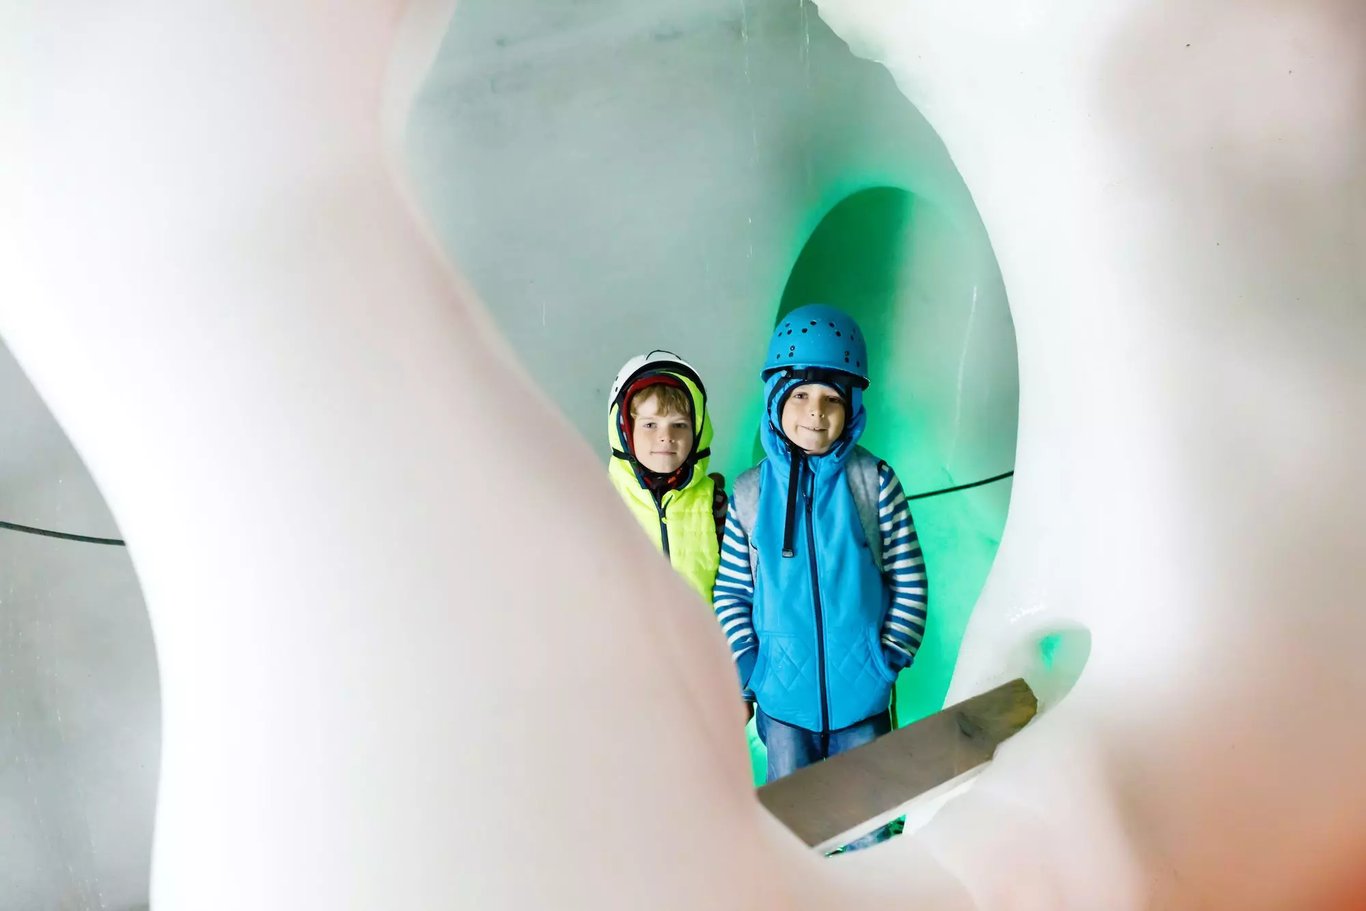 Detailed Guide to the Ice Palace of Hintertux, Zillertal